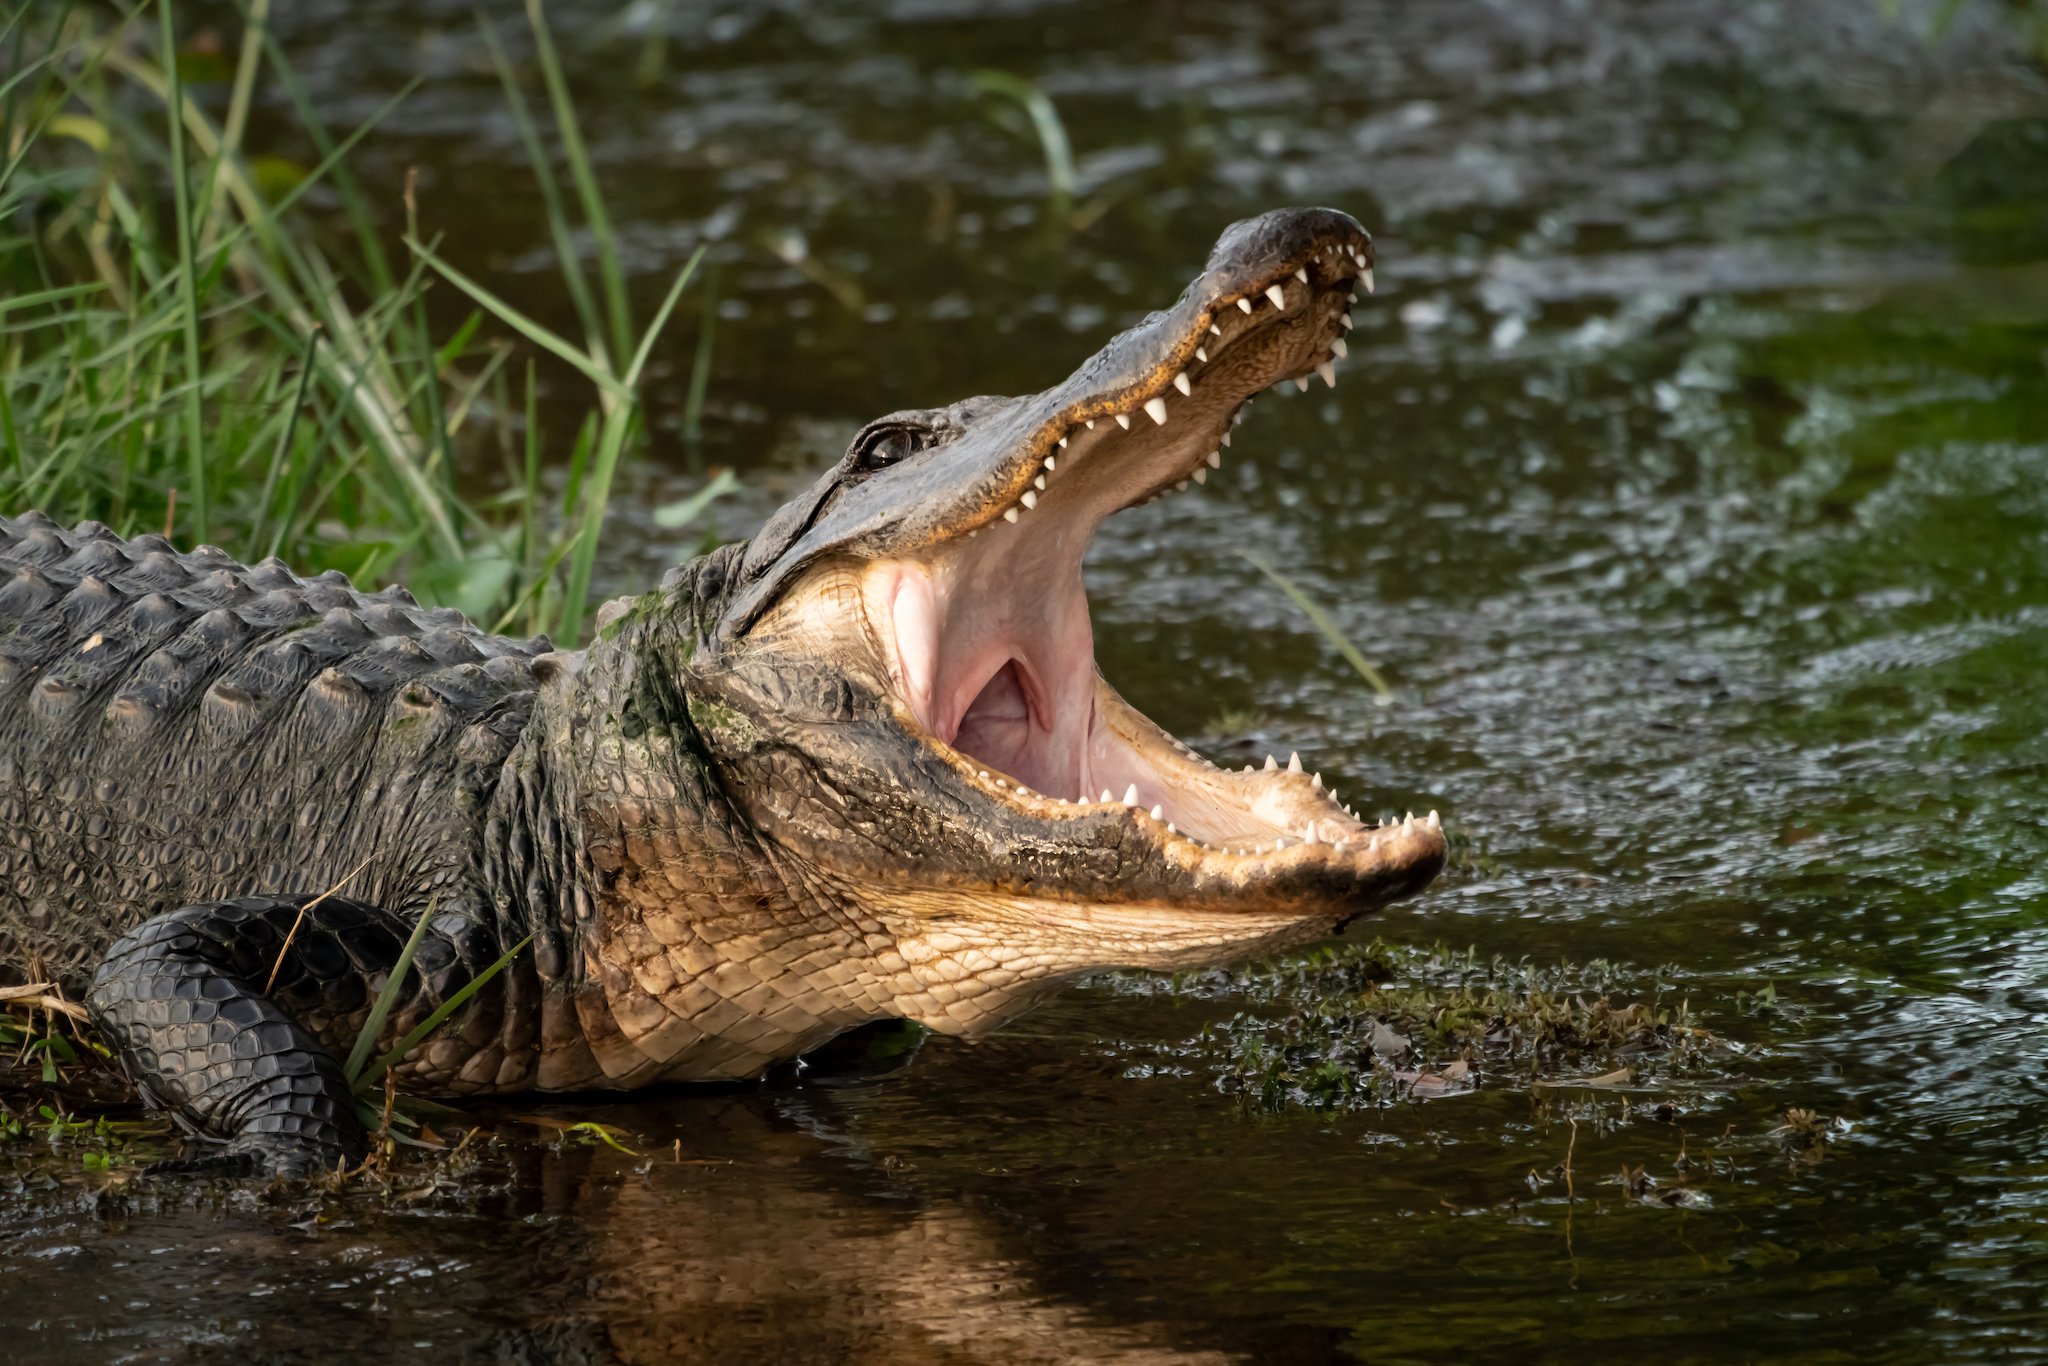 A captive alligator in a wetlands environment displays its teeth in an open-jawed pose.